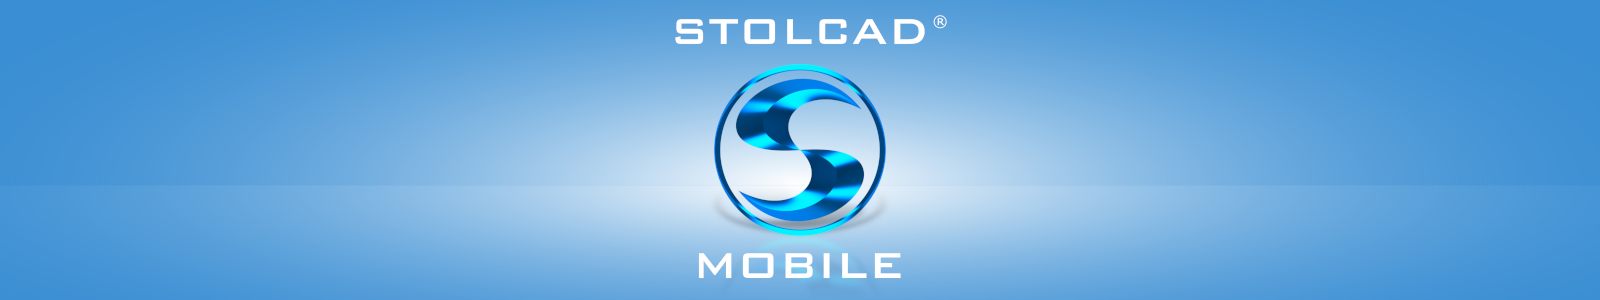 Stolcad Mobile